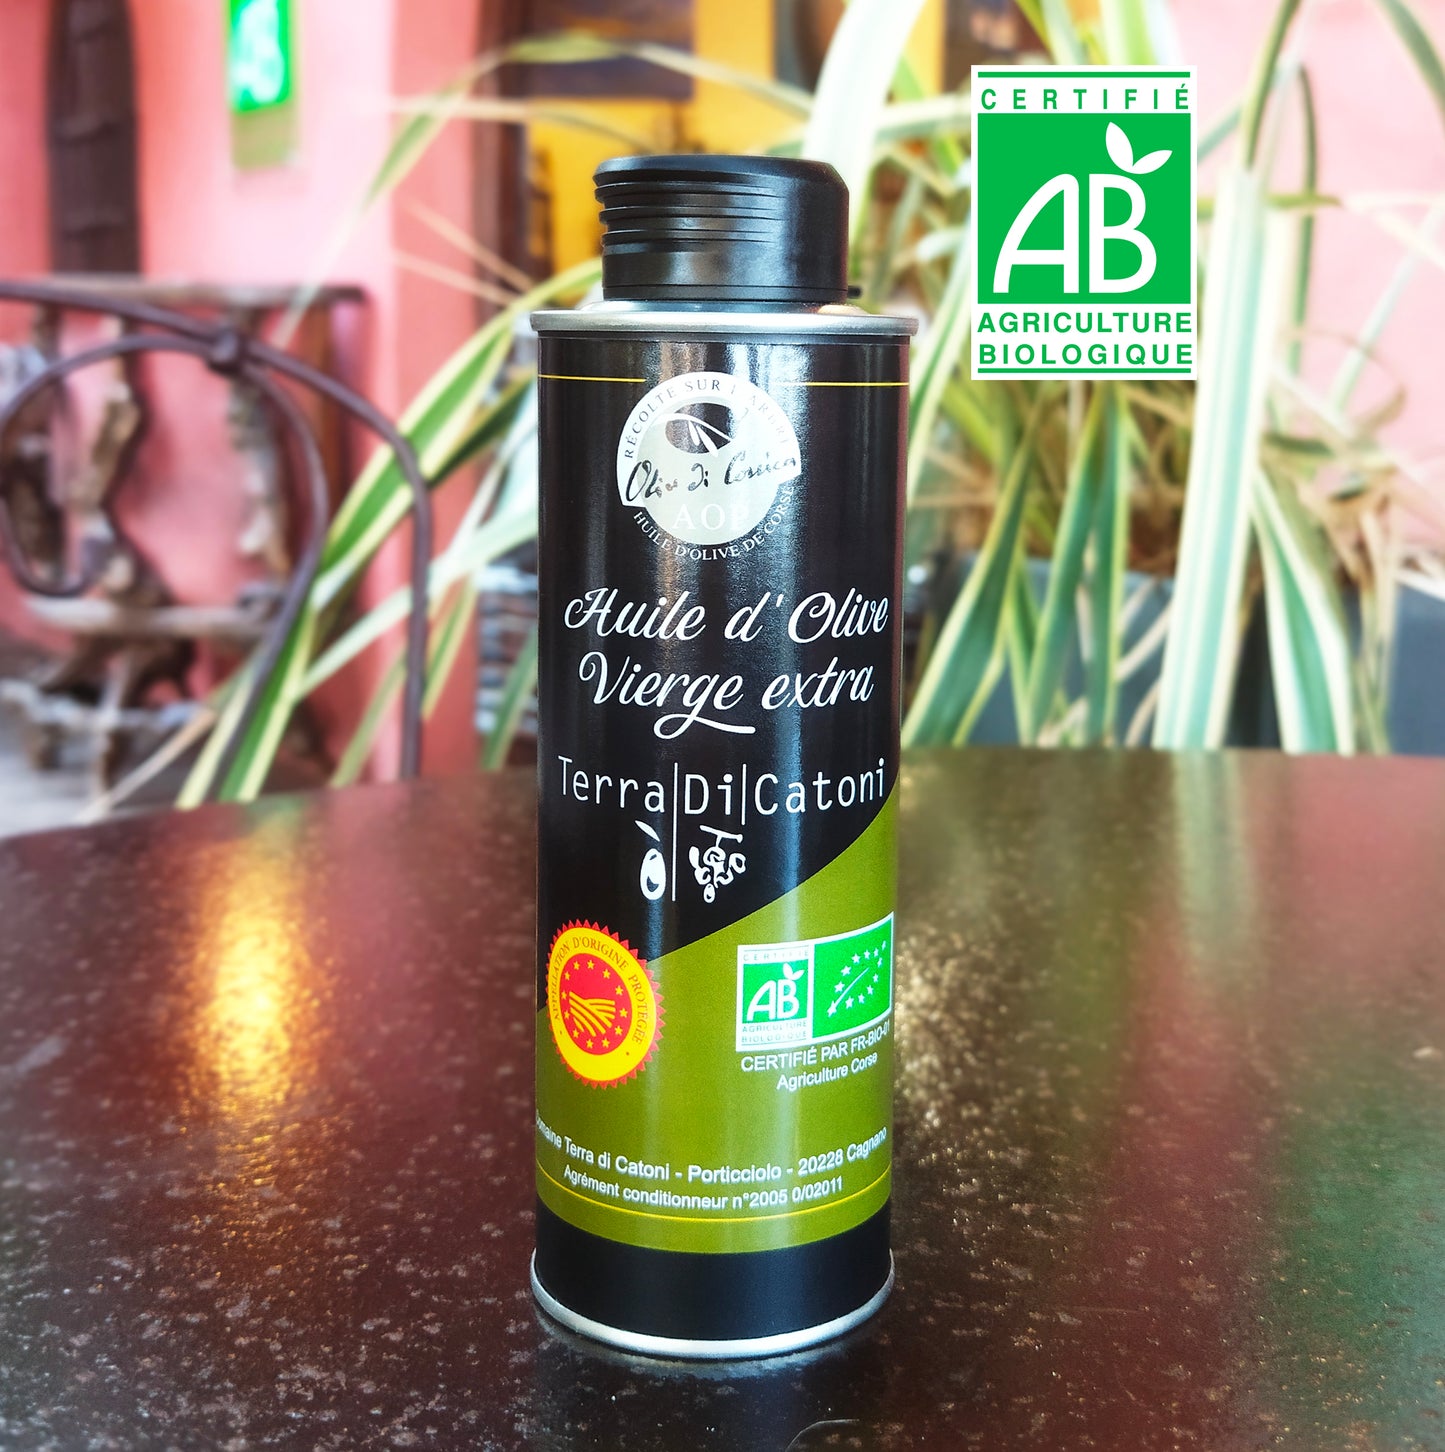 Corsican “fruity green” olive oil (25cl)